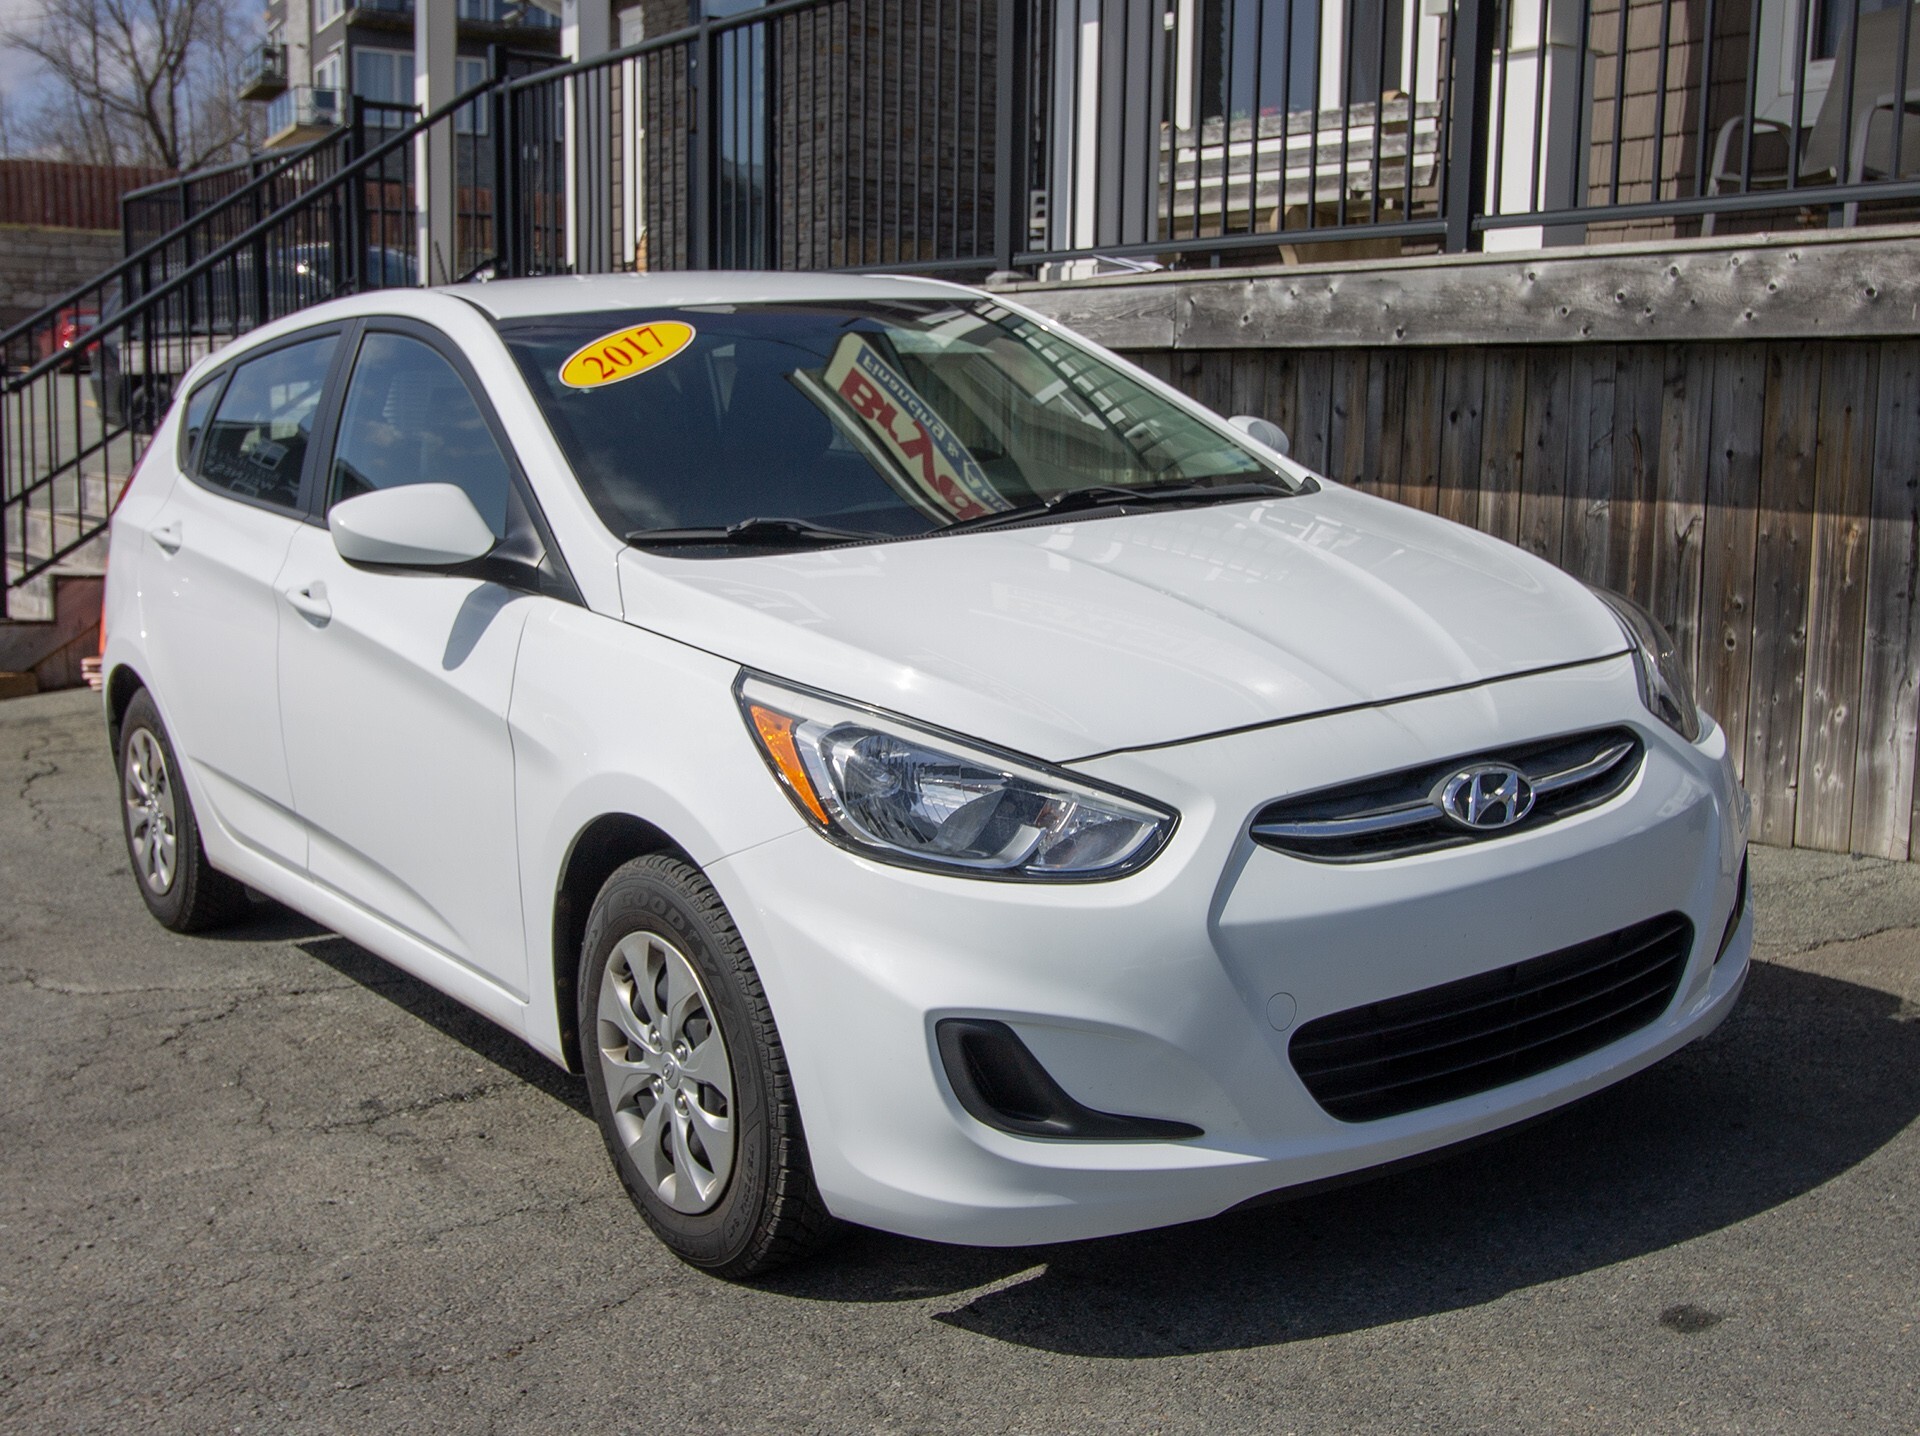 2017 Hyundai Accent 6 SPD MANUAL | EXTRA LOW KMS | FINANCING AVAILABLE